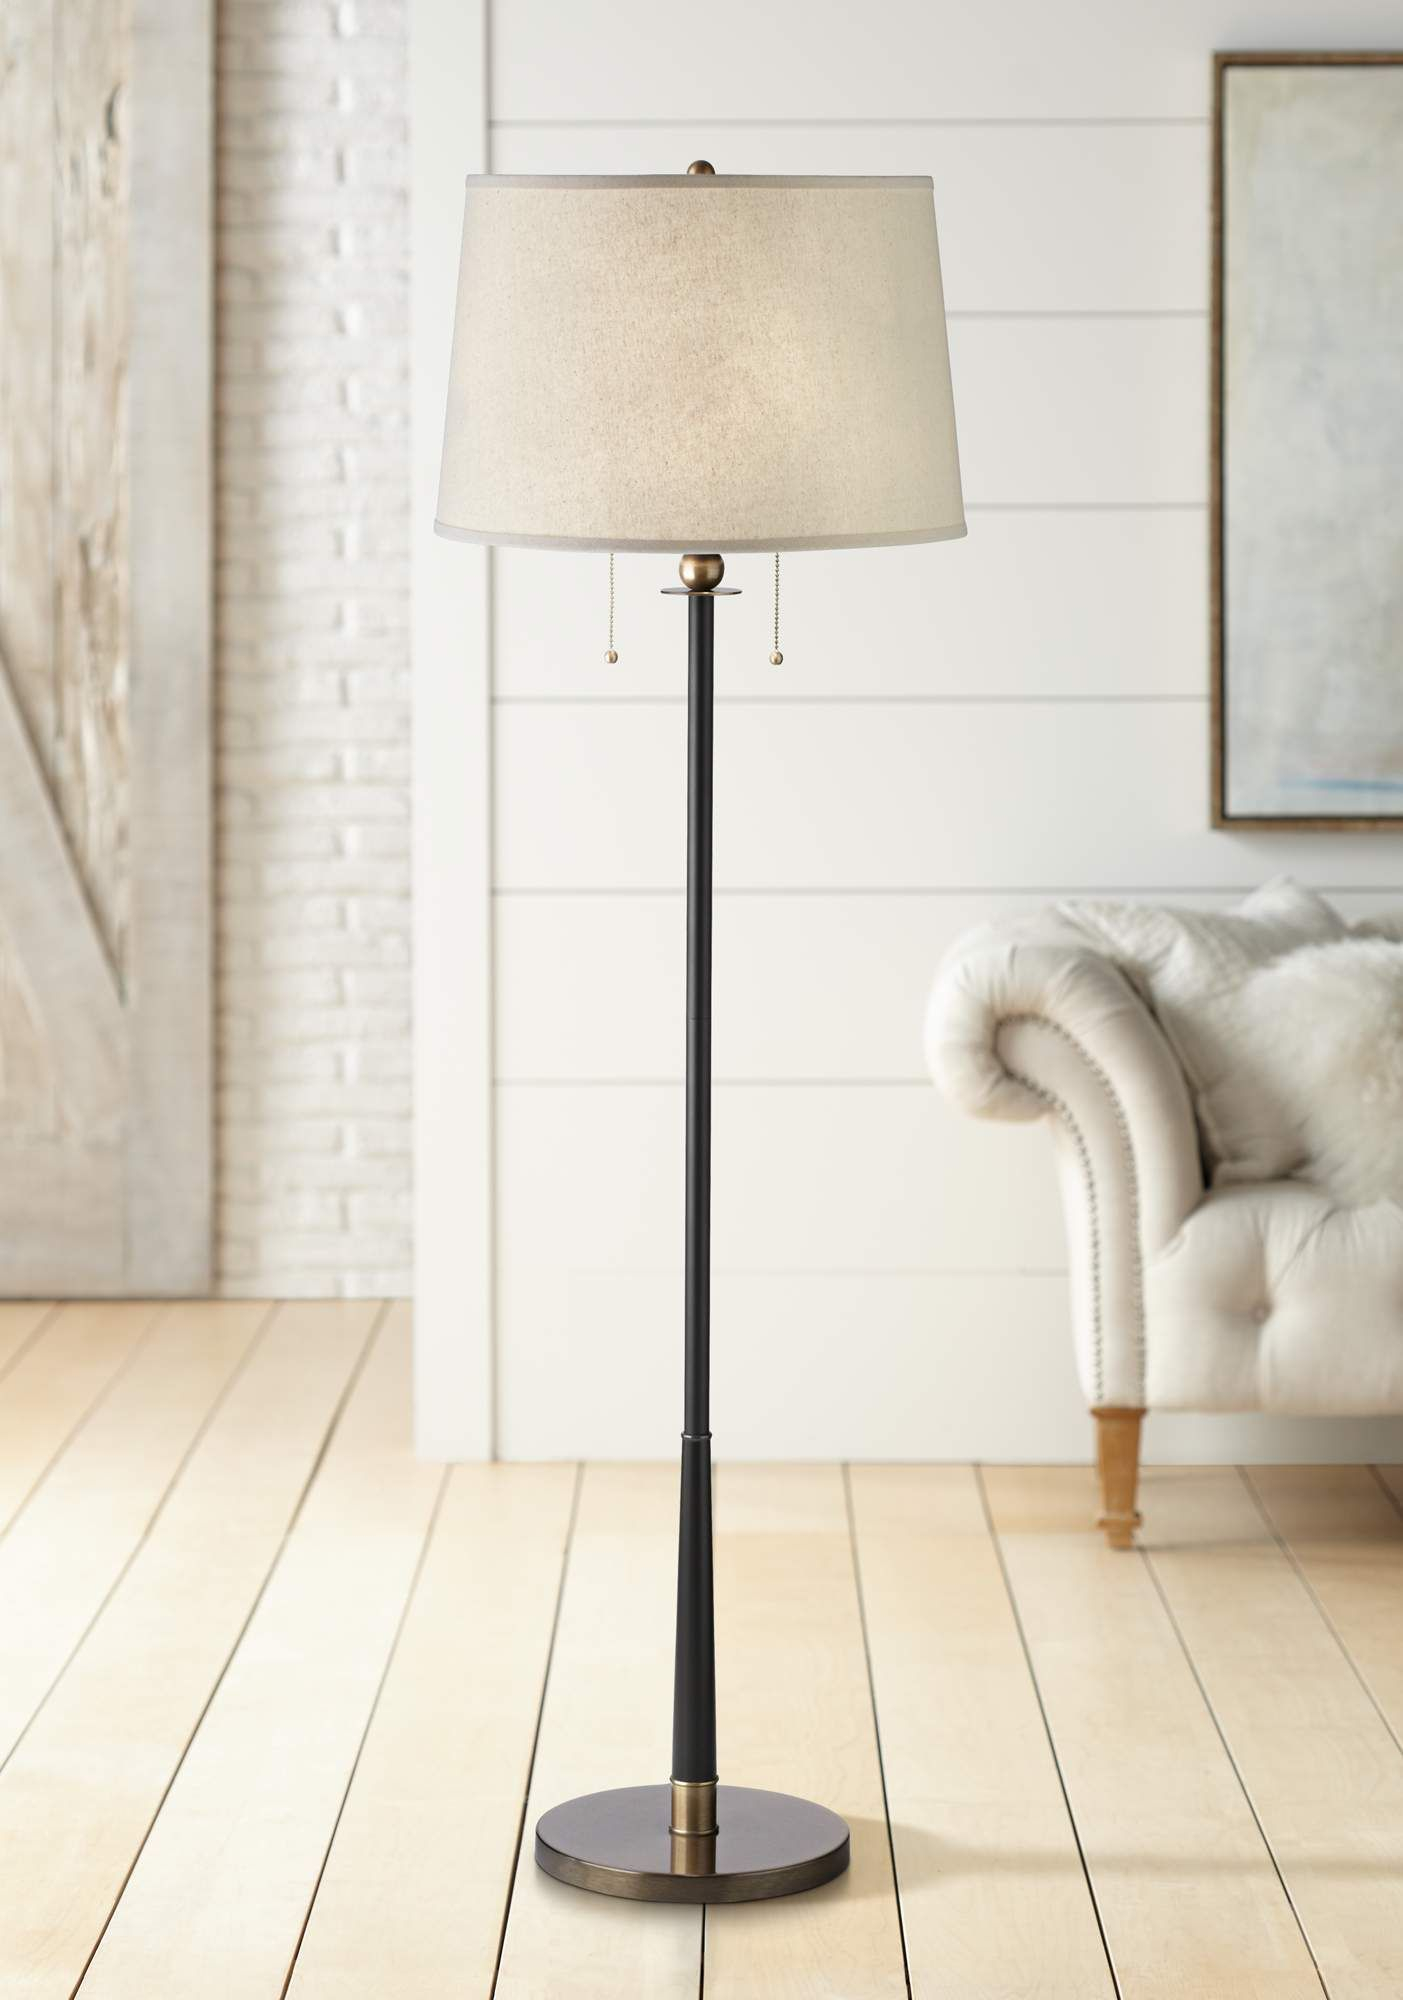 Kathy Ireland City Heights 59 High Antique Brass Floor Lamp throughout dimensions 1403 X 2000